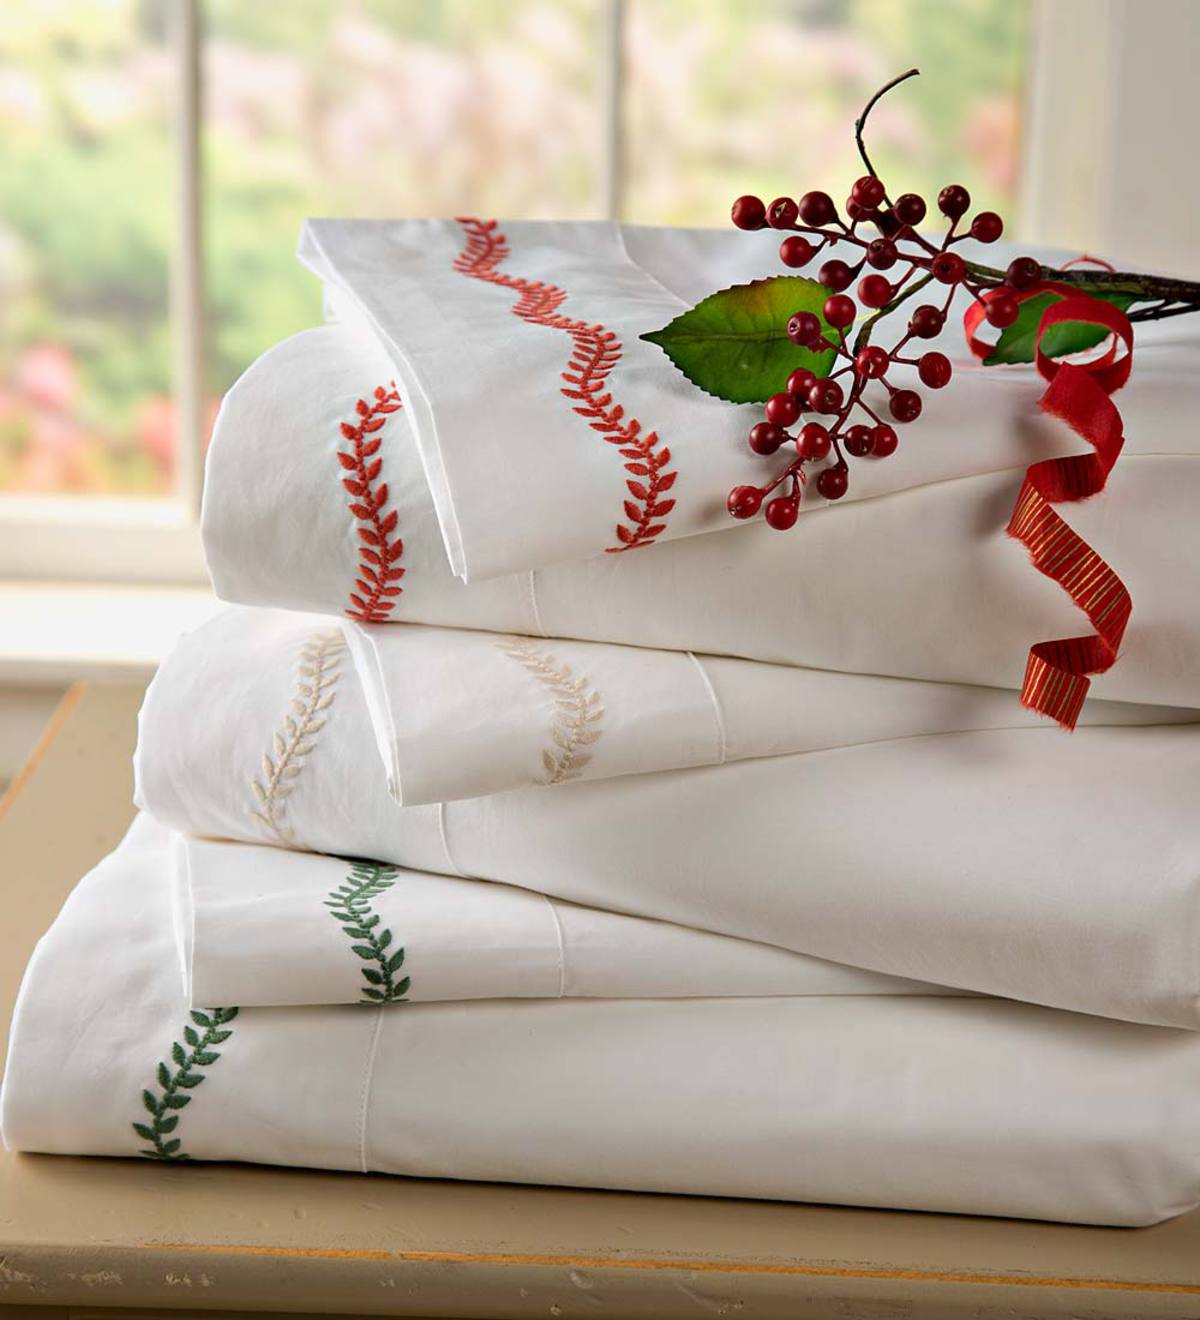 Queen Embroidered Cotton Percale Sheet Set